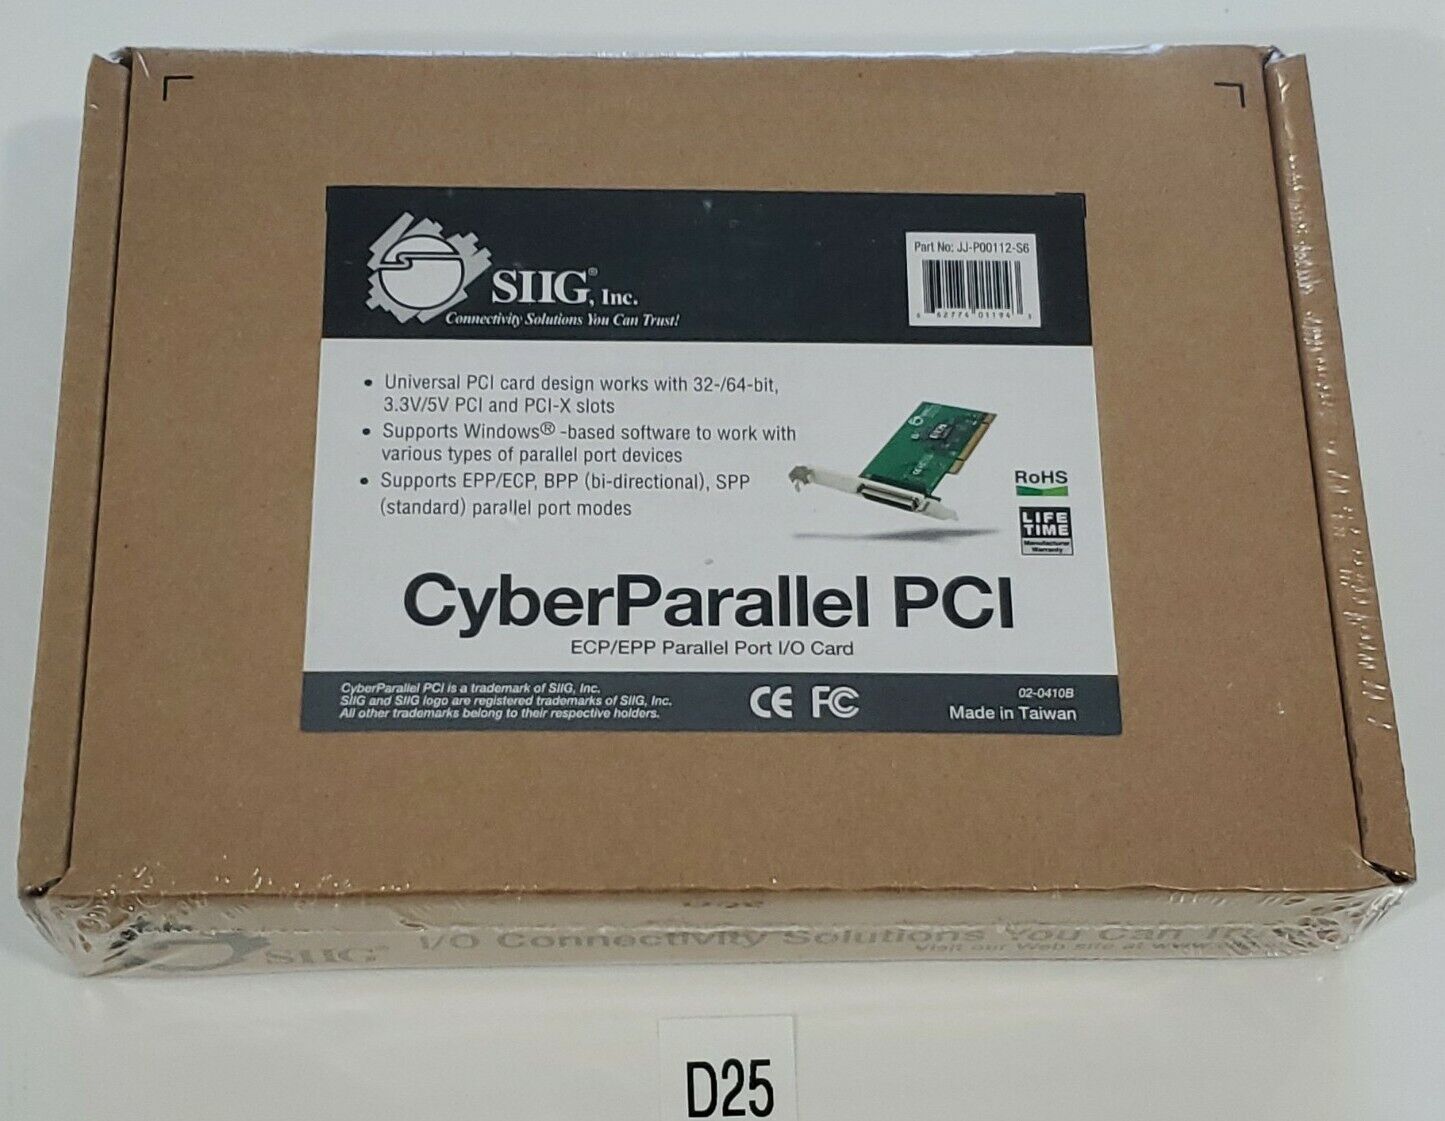 *NEW* SIIG JJ-P00112-S6 Cyber Parallel PCI ECP/EPP Parallel Port I/O Card 32/64B